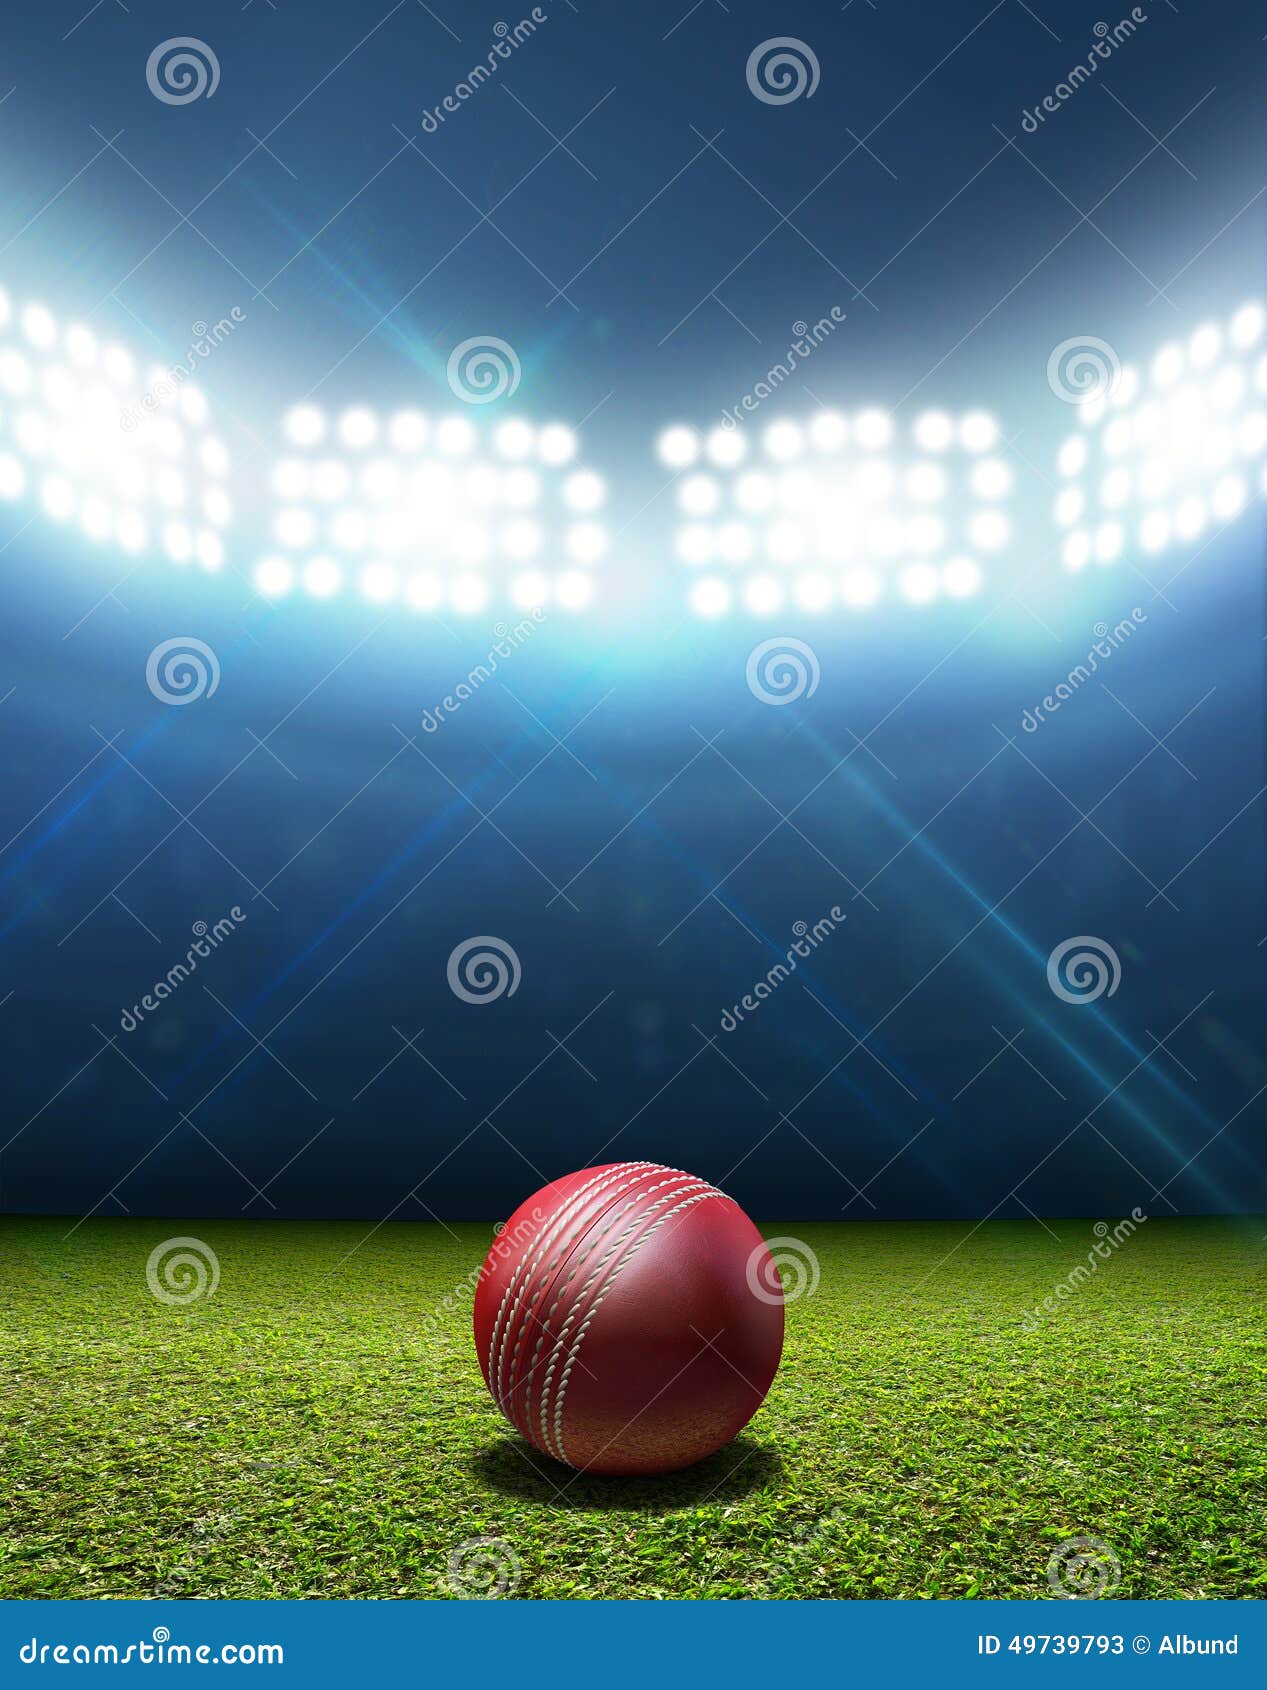 706 Background Cricket Stadium Stock Photos - Free & Royalty-Free Stock  Photos from Dreamstime